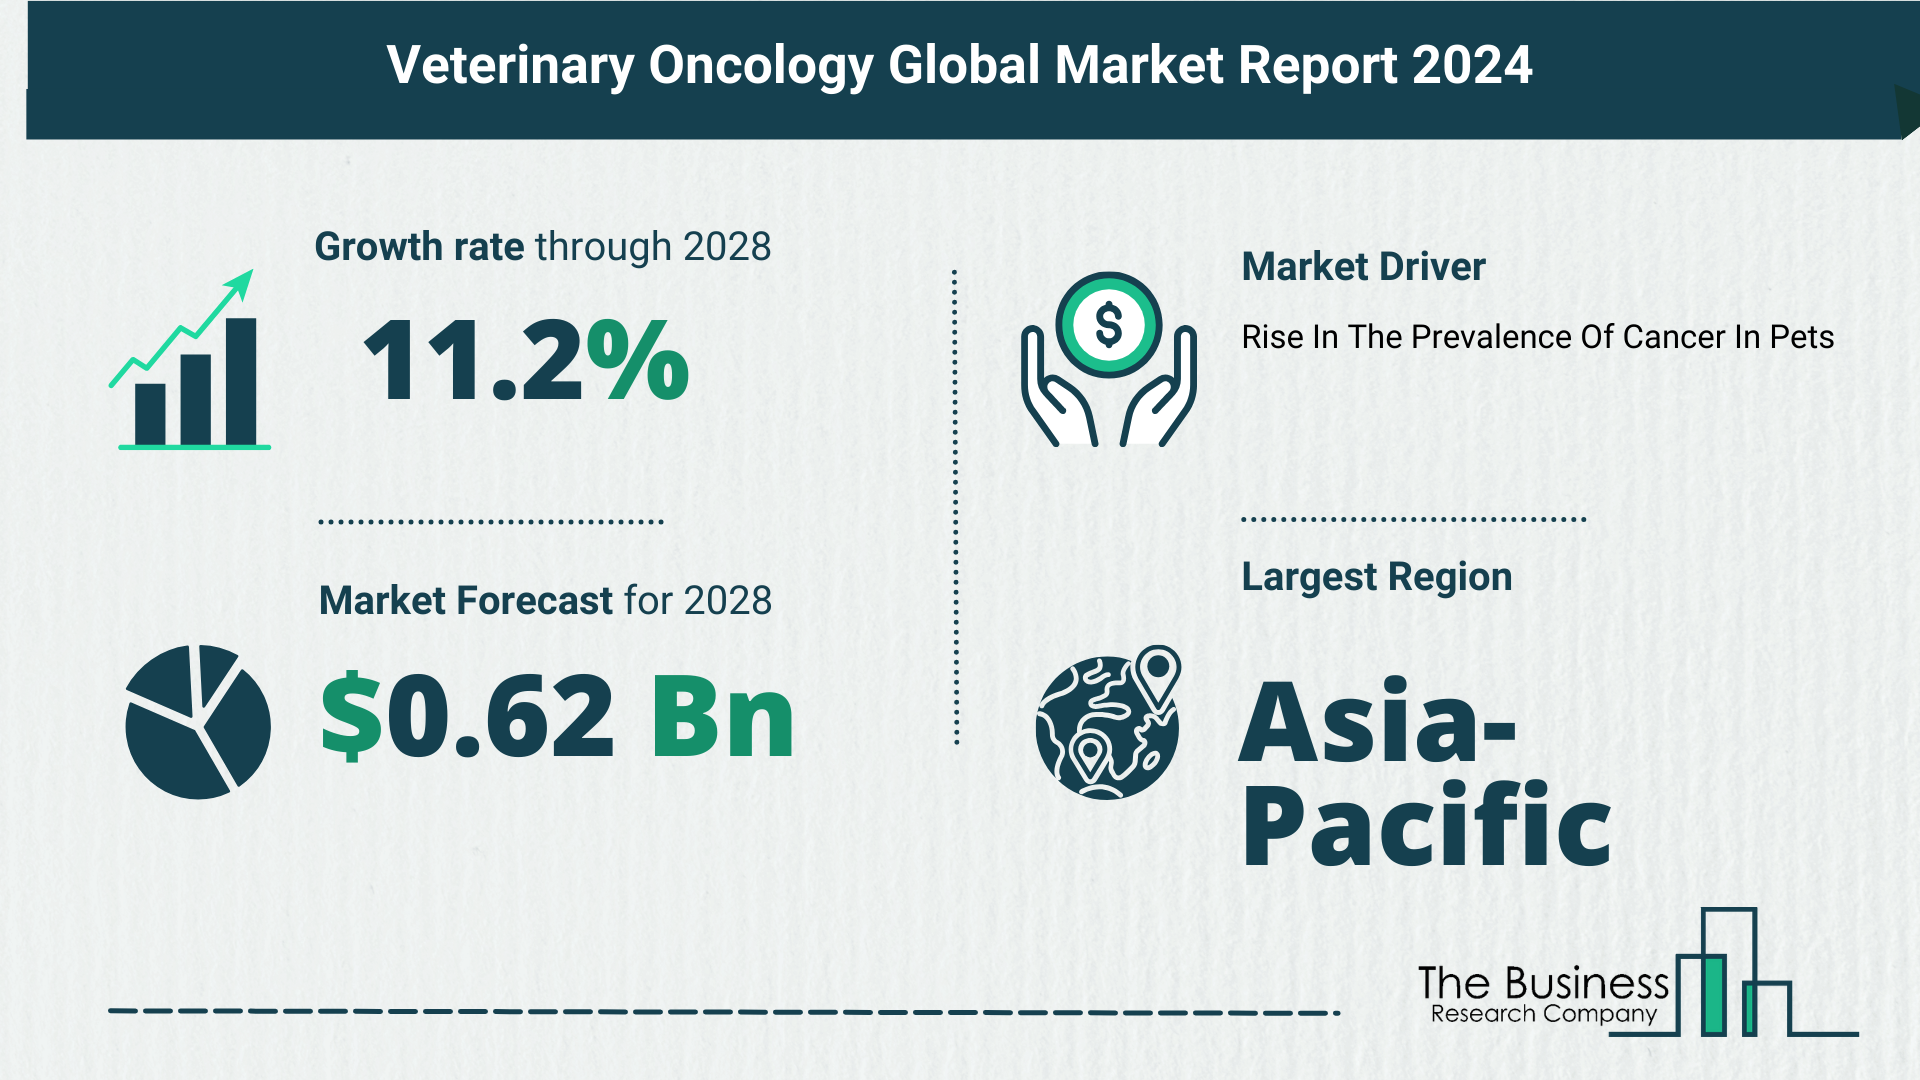 Top 5 Insights From The Veterinary Oncology Market Report 2024